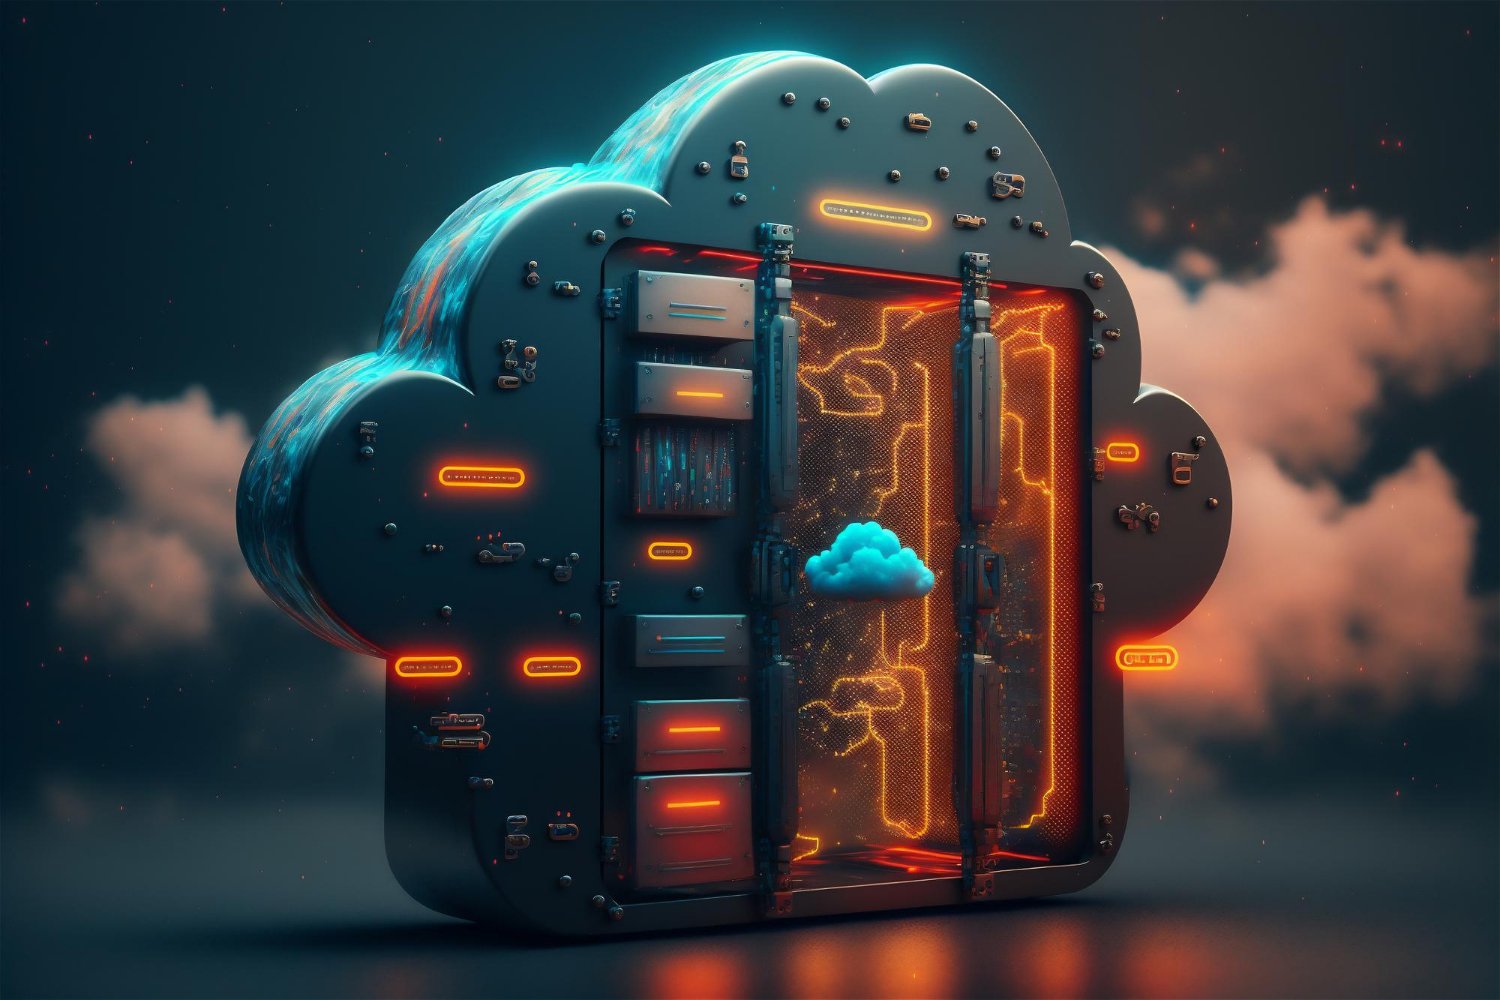 How Does Cloud-Based Server Architecture Embrace IoT Connectivity?